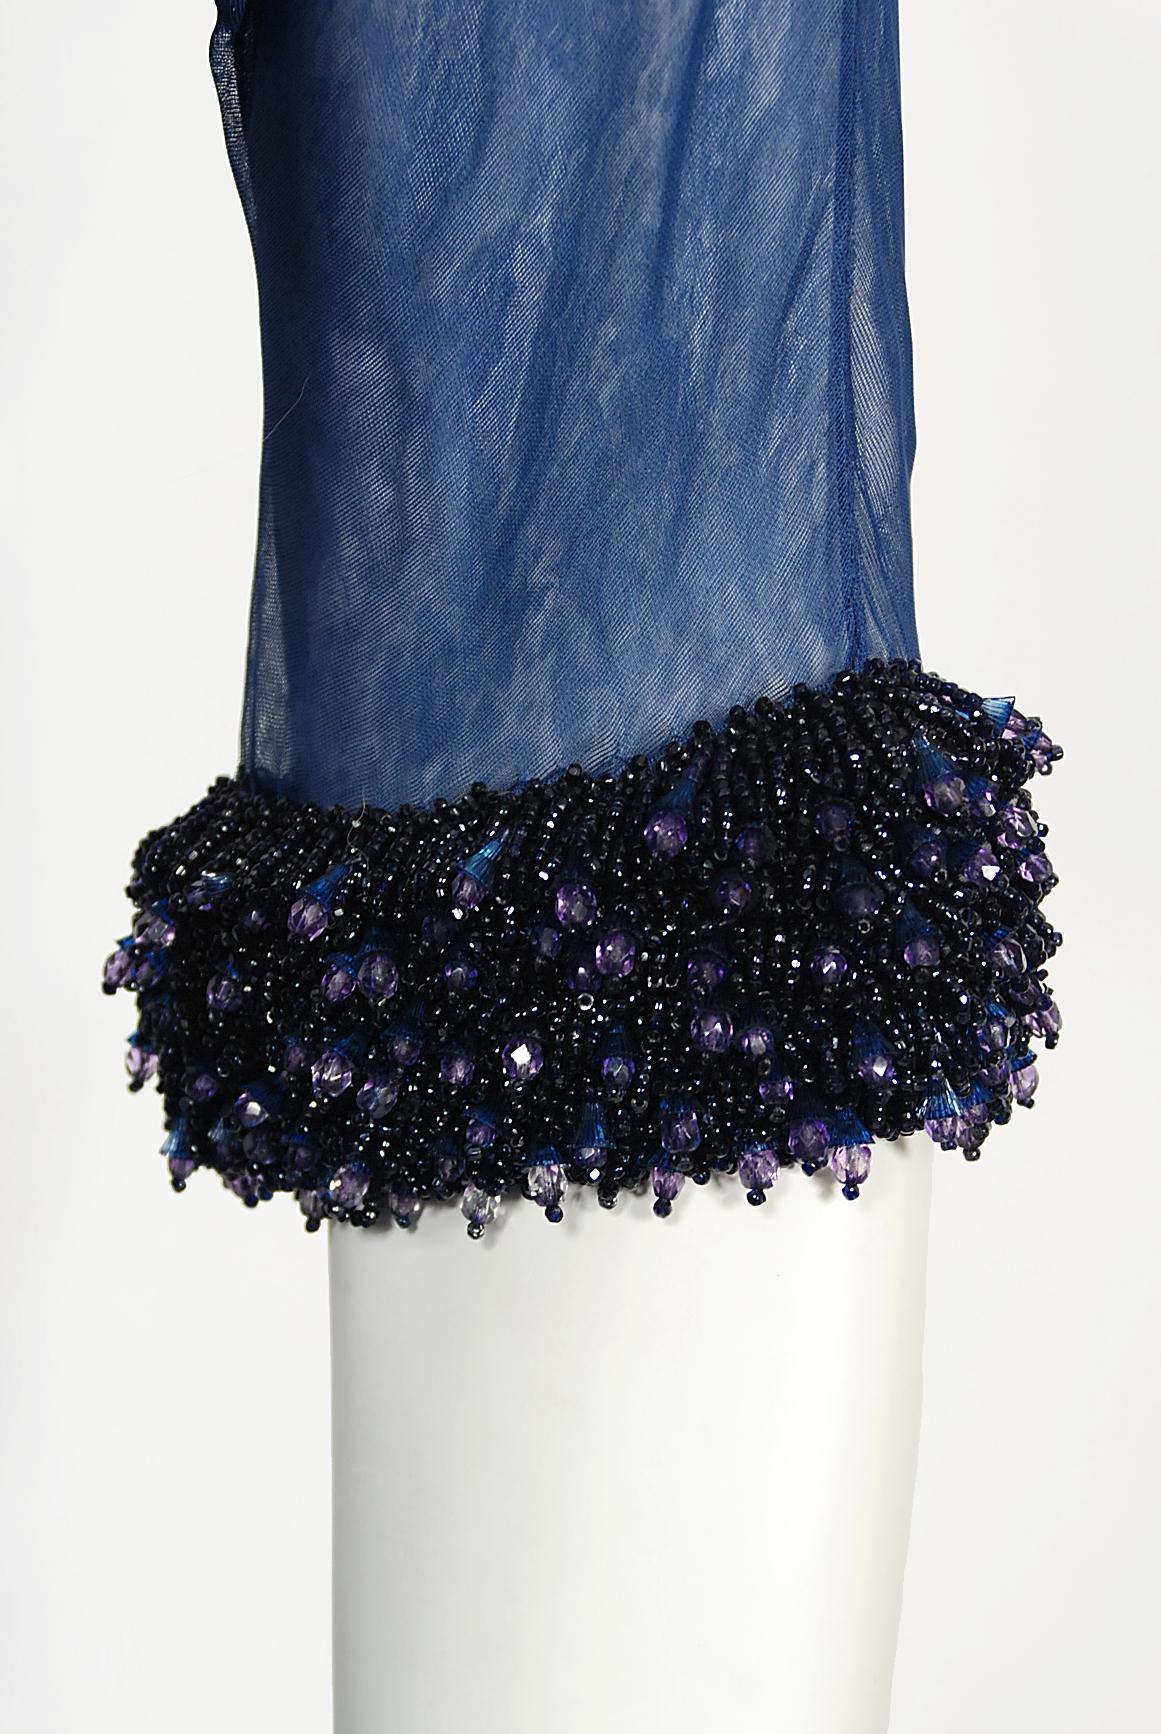 Vintage 1960s Madame Grès Haute Couture Blue Beaded Sheer Silk Trained Gown 4